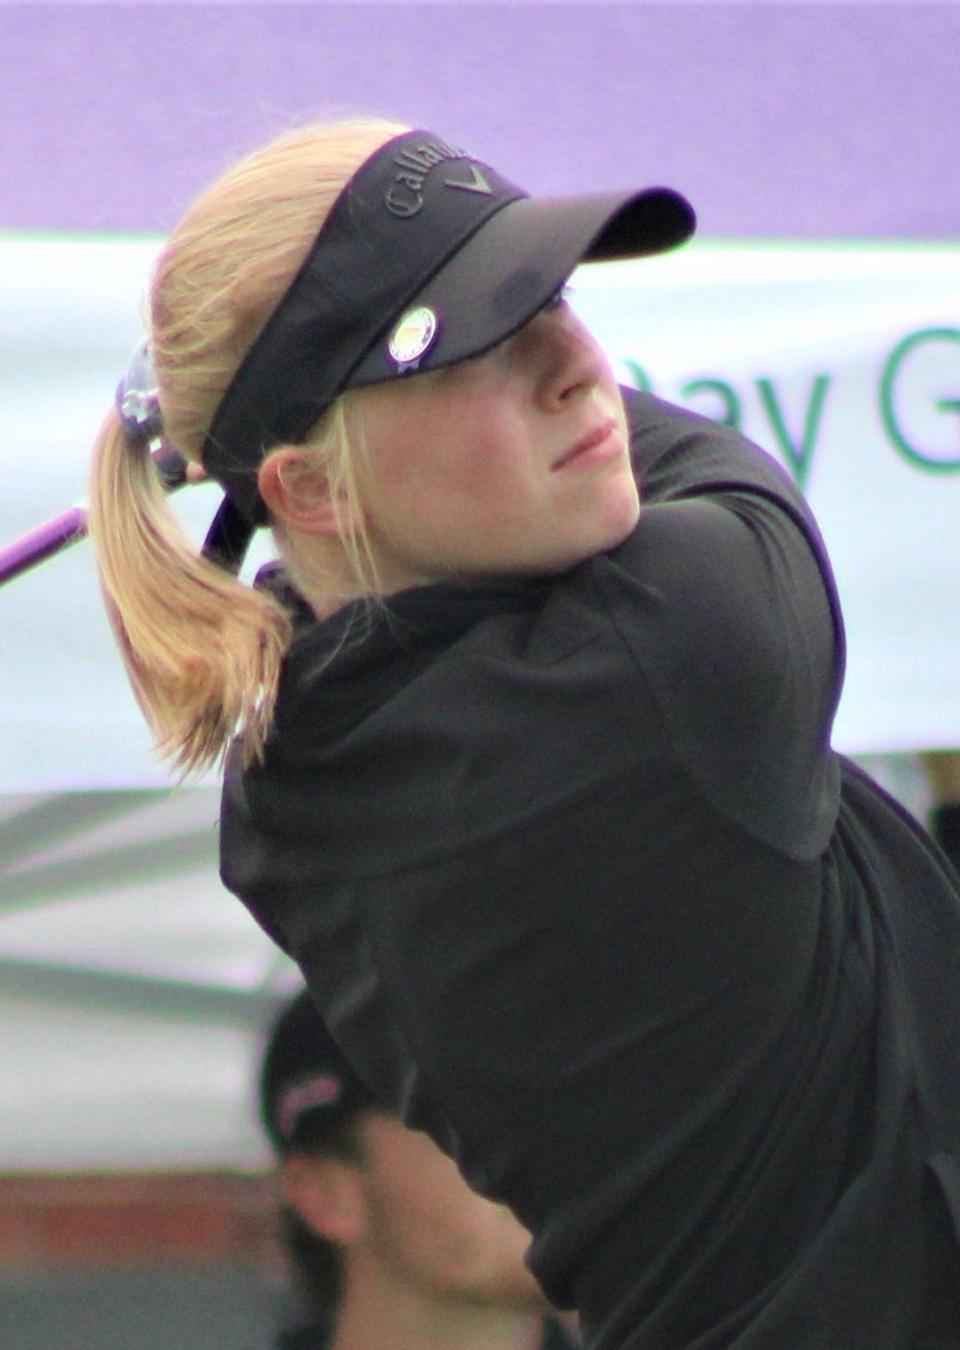 Gracyn Vidovic of Aurora won the local qualifier in the girls' 14-15 age group at the Lake Forest Country Club Drive, Chip and Putt qualifier.